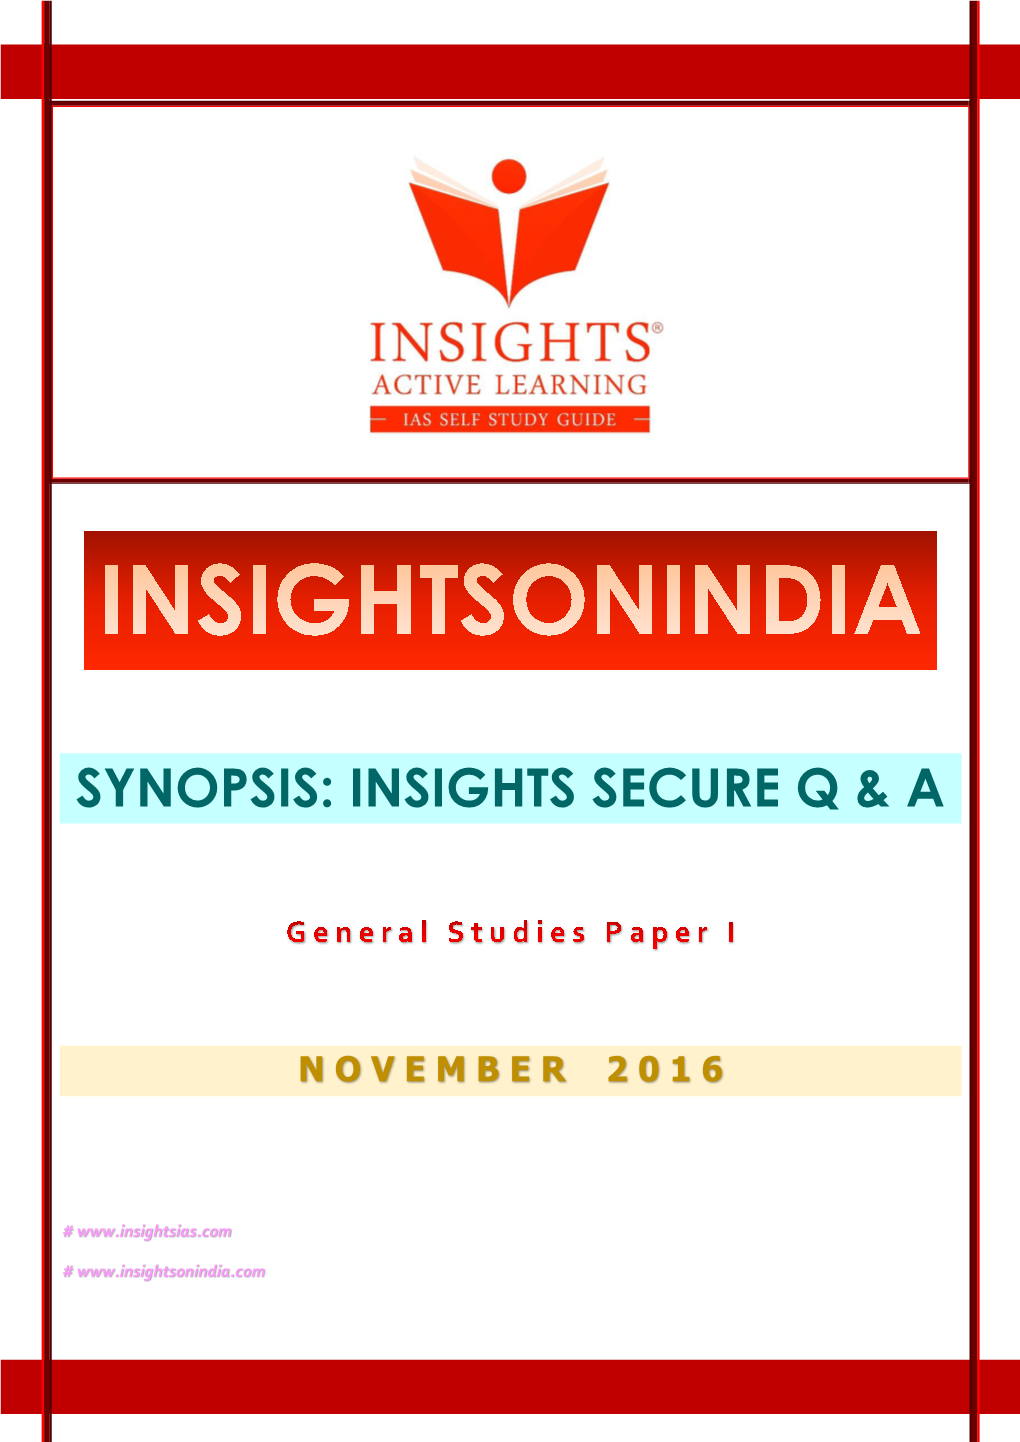 Synopsis: Insights Secure Q & A